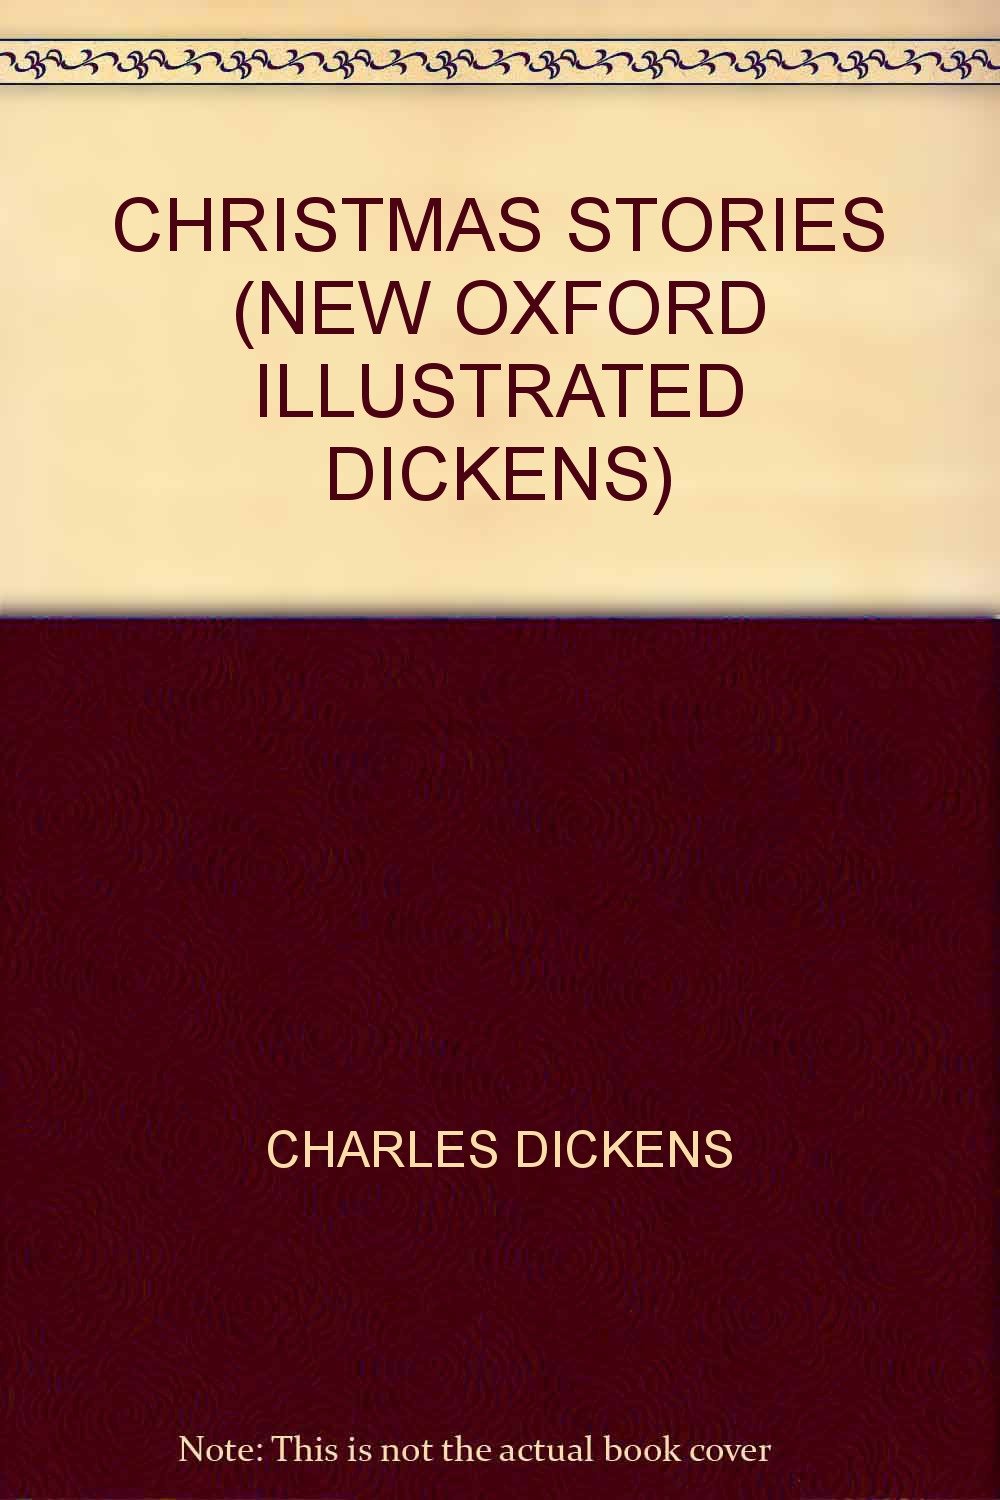 CHRISTMAS STORIES (NEW OXFORD ILLUSTRATED DICKENS) [Hardcover] CHARLES DICKENS